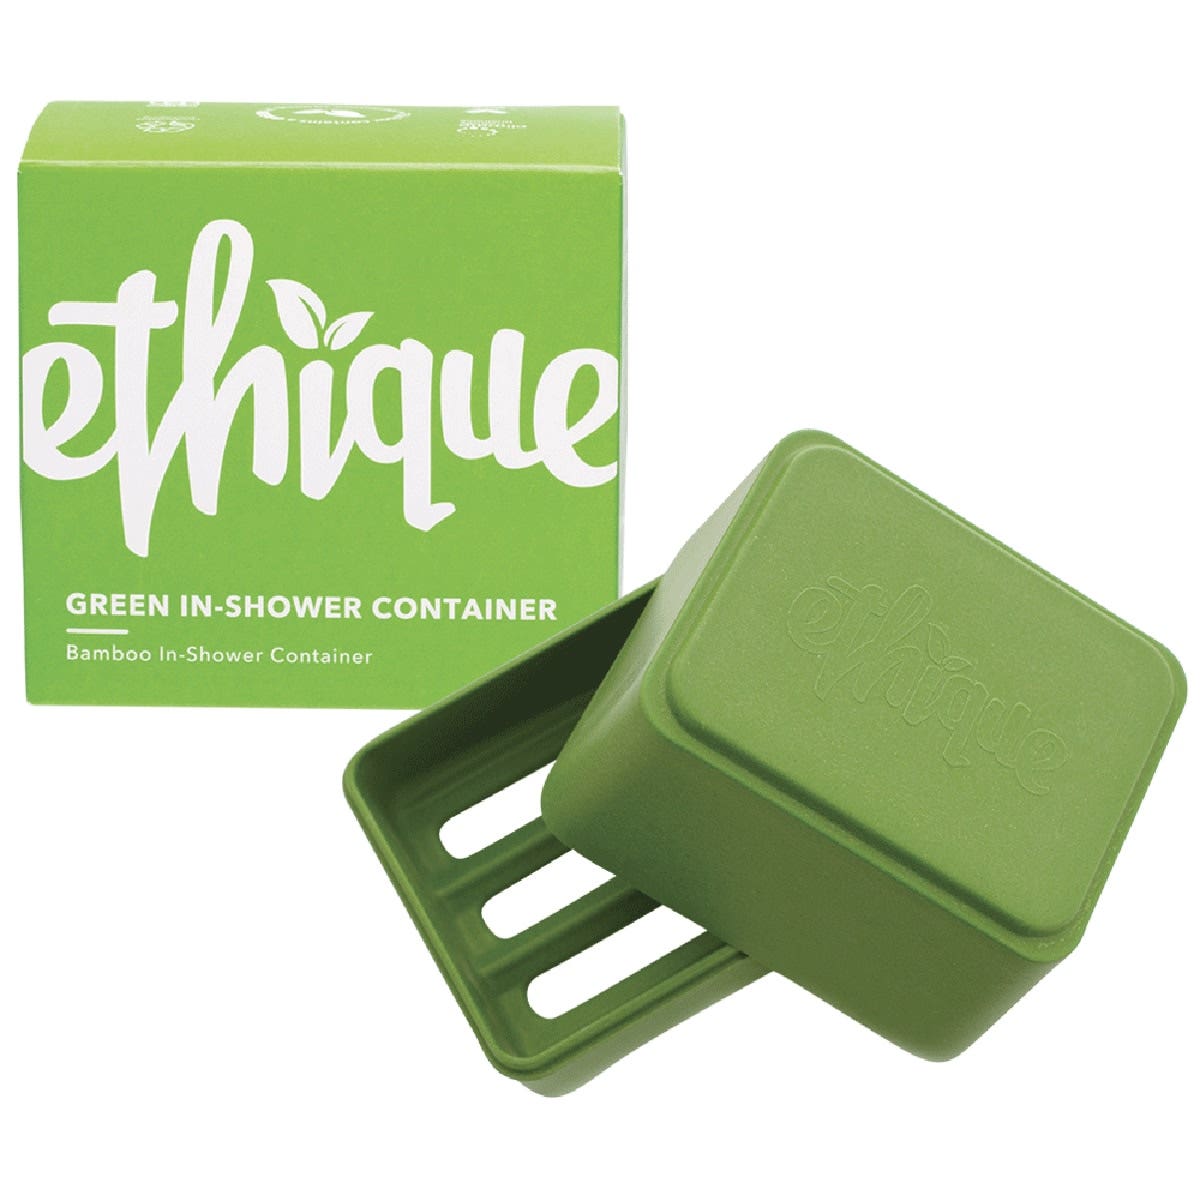 (CLEARANCE!) Ethique Bamboo & Cornstarch Shower Container